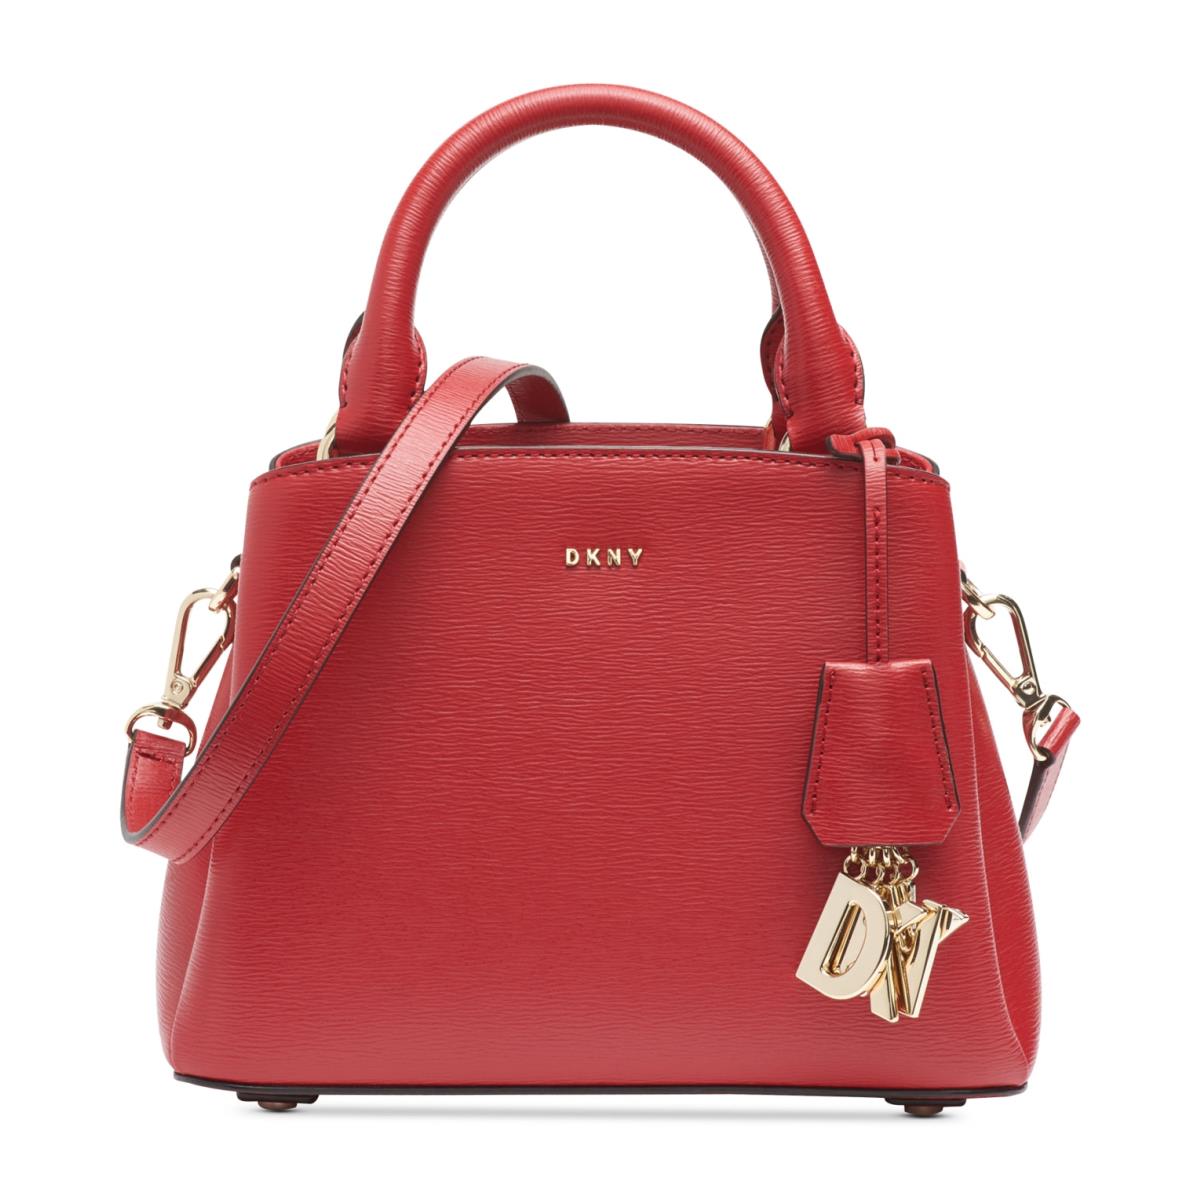 Dkny Womens Paige Small Leather Satchel One Size Bright Red/Gold